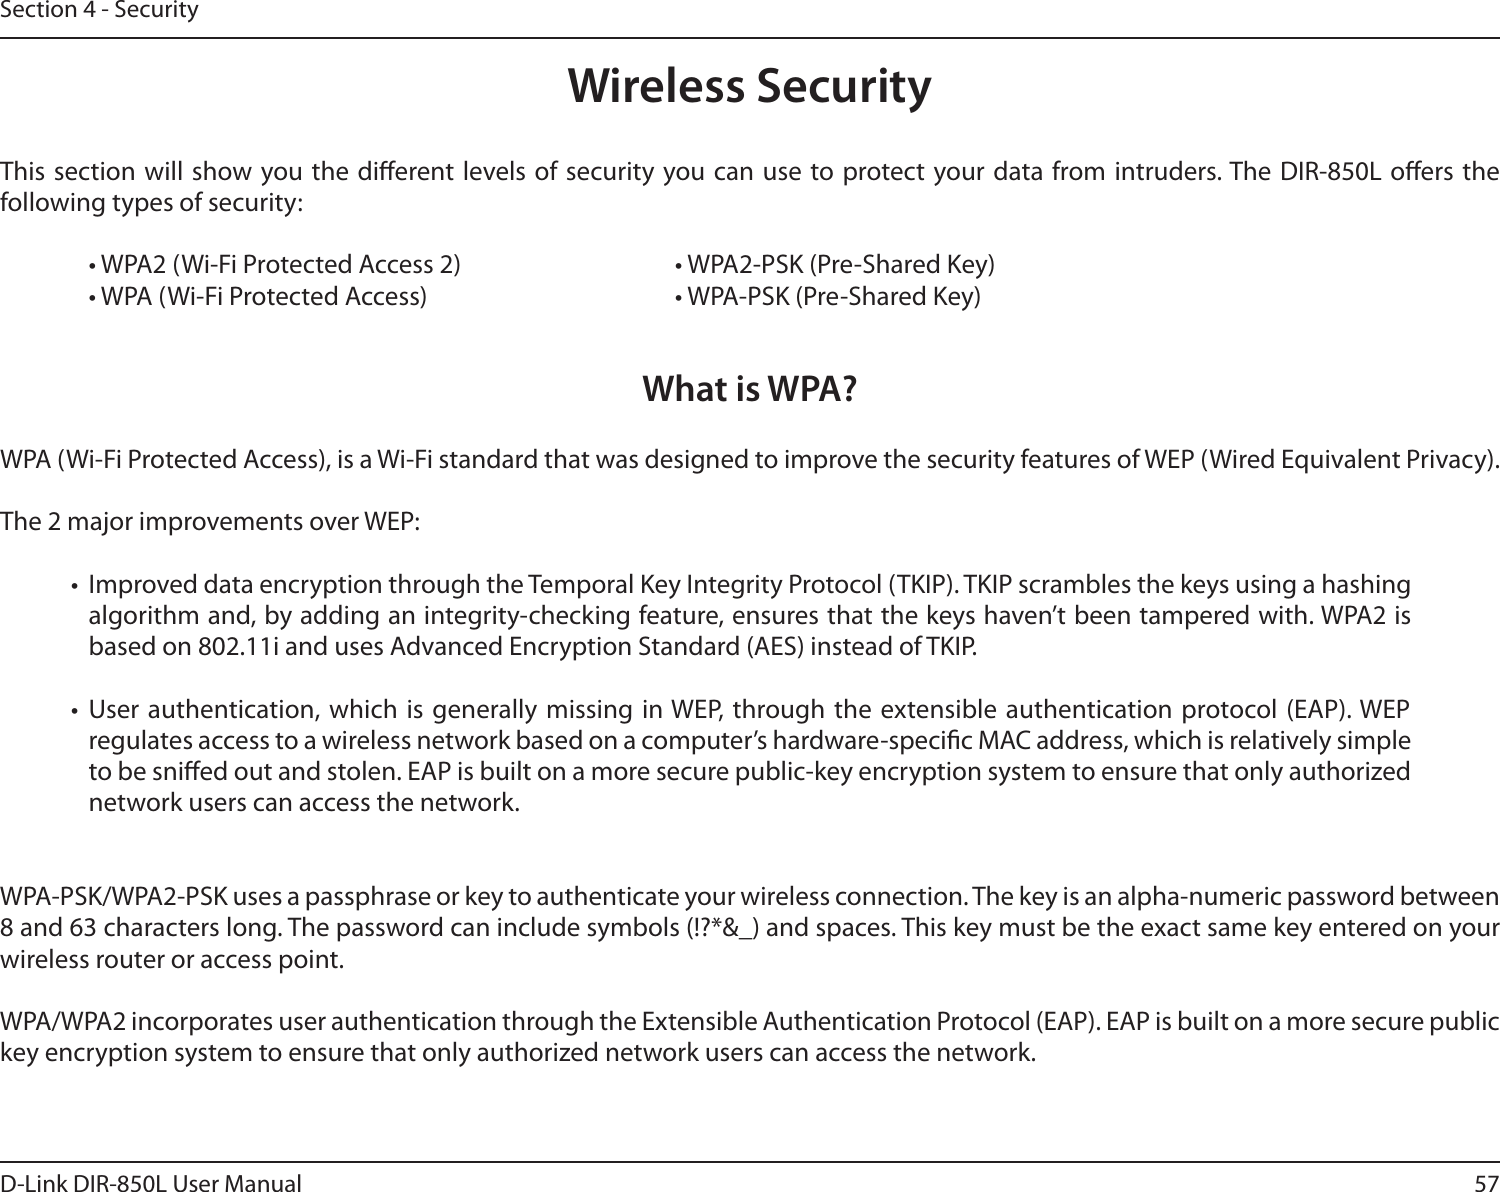 57D-Link DIR-850L User ManualSection 4 - SecurityWireless SecurityThis section will  show you the dierent levels of security  you can use  to protect your data from intruders. The DIR-850L oers the following types of security:  • WPA2 (Wi-Fi Protected Access 2)       • WPA2-PSK (Pre-Shared Key)  • WPA (Wi-Fi Protected Access)        • WPA-PSK (Pre-Shared Key)What is WPA?WPA (Wi-Fi Protected Access), is a Wi-Fi standard that was designed to improve the security features of WEP (Wired Equivalent Privacy).  The 2 major improvements over WEP: •  Improved data encryption through the Temporal Key Integrity Protocol (TKIP). TKIP scrambles the keys using a hashing algorithm and, by adding an integrity-checking feature, ensures that the keys haven’t been tampered with. WPA2 is based on 802.11i and uses Advanced Encryption Standard (AES) instead of TKIP.•  User authentication, which is generally missing in WEP,  through the extensible authentication protocol (EAP). WEP regulates access to a wireless network based on a computer’s hardware-specic MAC address, which is relatively simple to be snied out and stolen. EAP is built on a more secure public-key encryption system to ensure that only authorized network users can access the network.WPA-PSK/WPA2-PSK uses a passphrase or key to authenticate your wireless connection. The key is an alpha-numeric password between 8 and 63 characters long. The password can include symbols (!?*&amp;_) and spaces. This key must be the exact same key entered on your wireless router or access point.WPA/WPA2 incorporates user authentication through the Extensible Authentication Protocol (EAP). EAP is built on a more secure public key encryption system to ensure that only authorized network users can access the network.